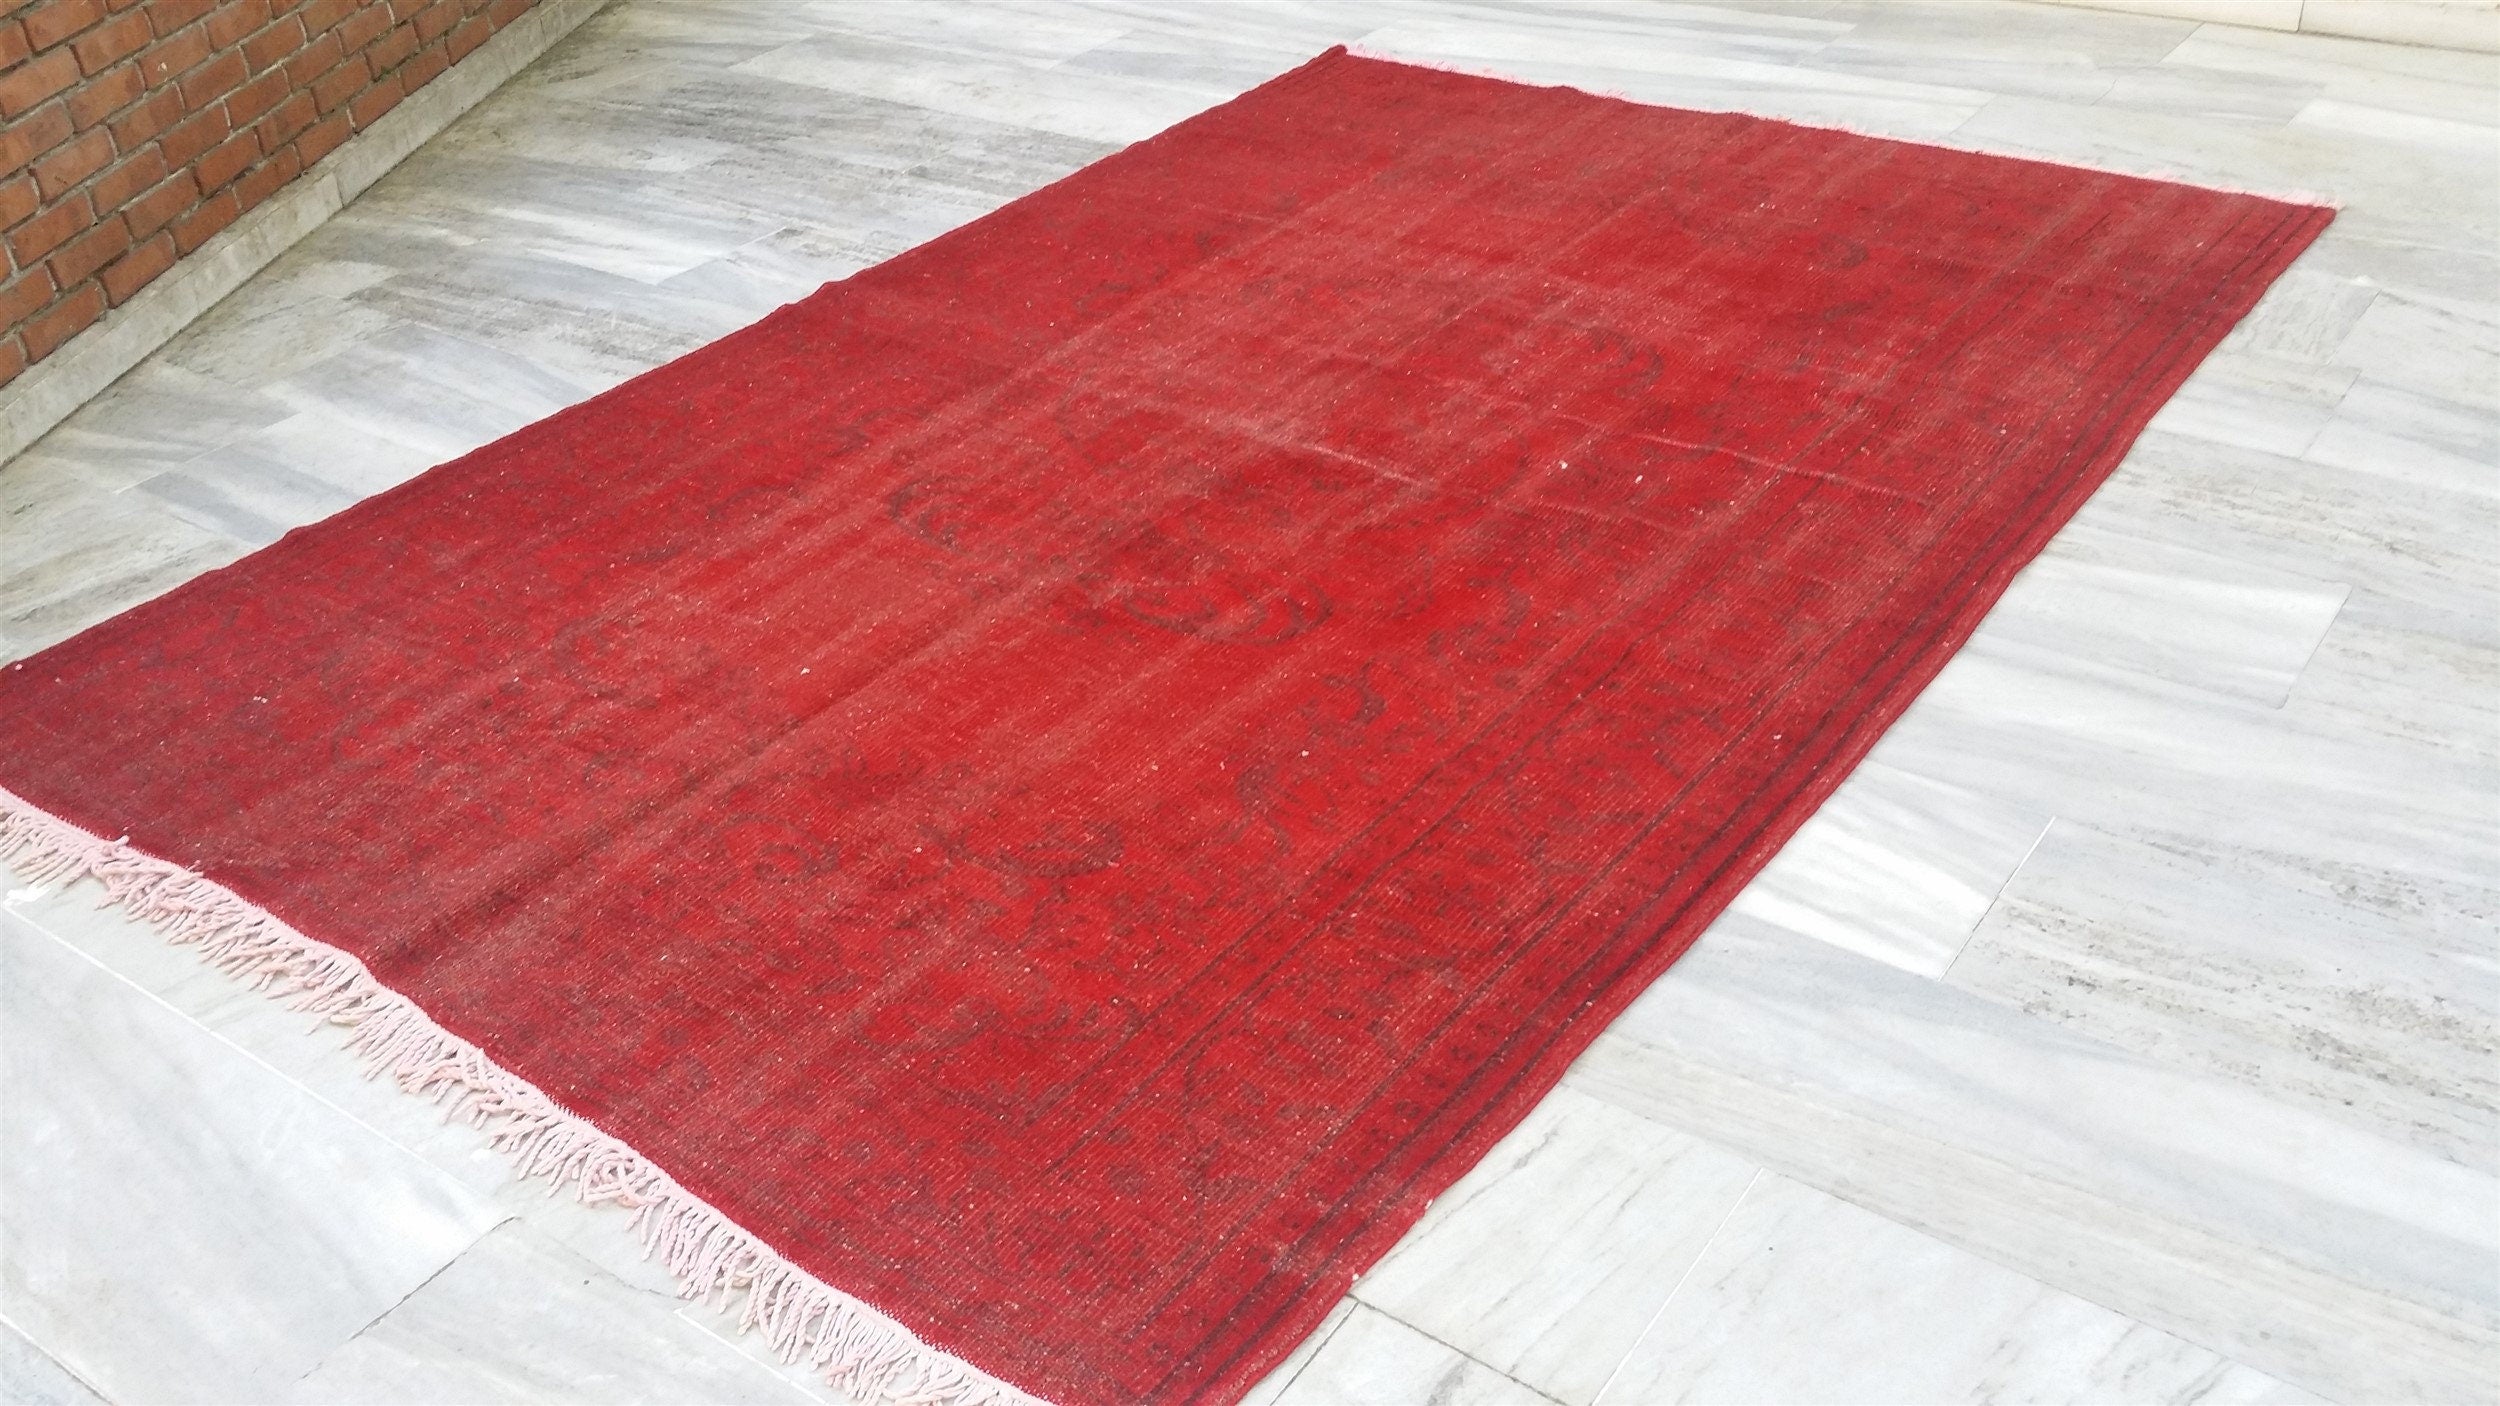 Overdyed Red Turkish Rug, Recycled Vintage Rug, 9'3"x6'2"